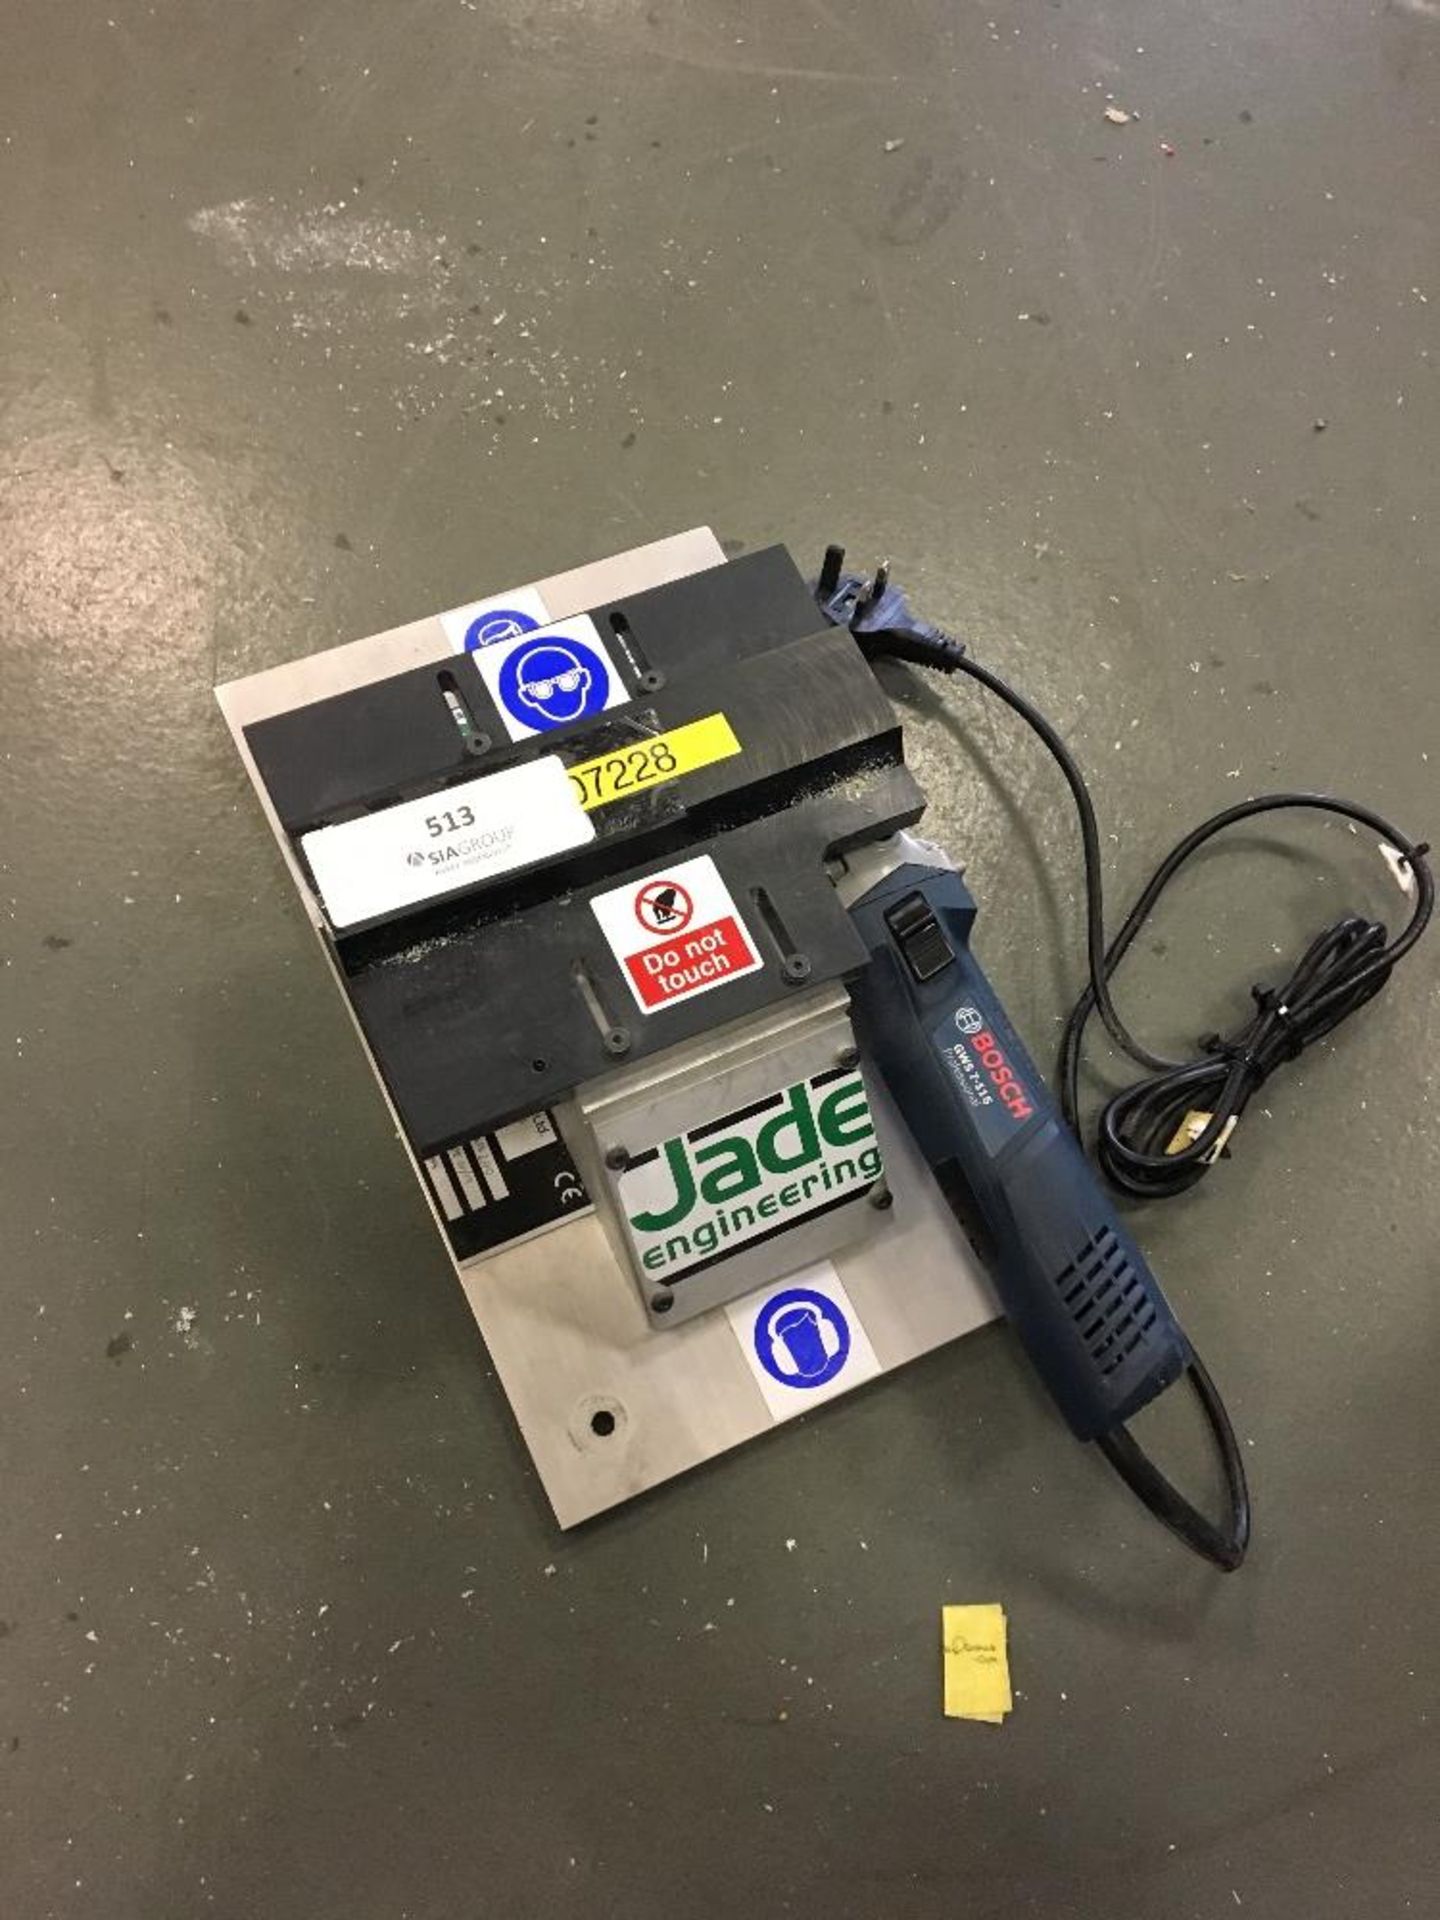 Jade Engineering wall mounted jig with Bosch GWS 7-115 Professional grinder - Image 2 of 3